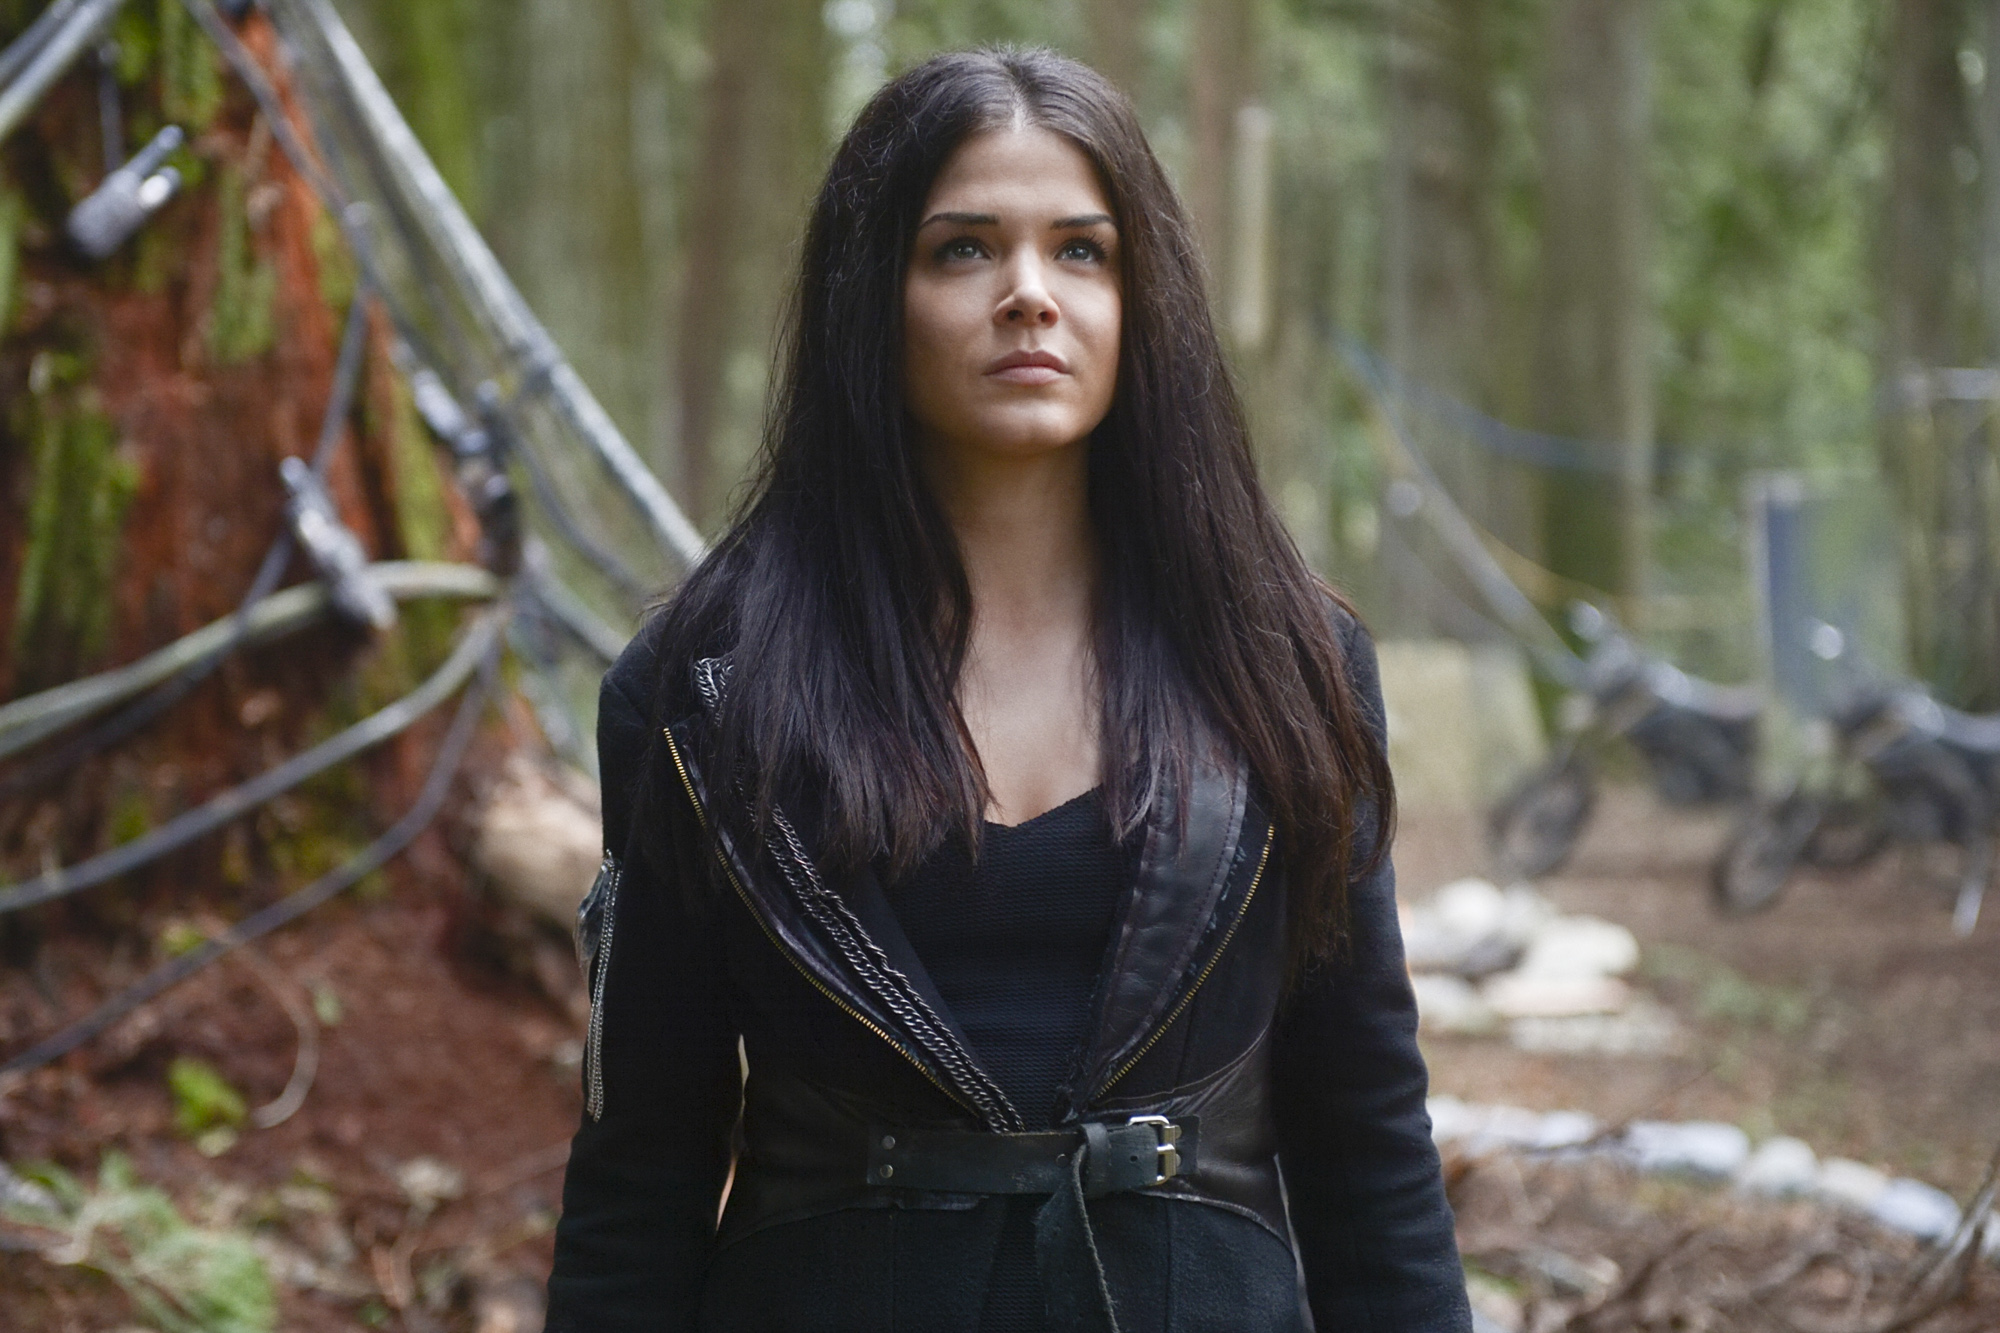 Who is Octavia Blake in The 100? – The Sun